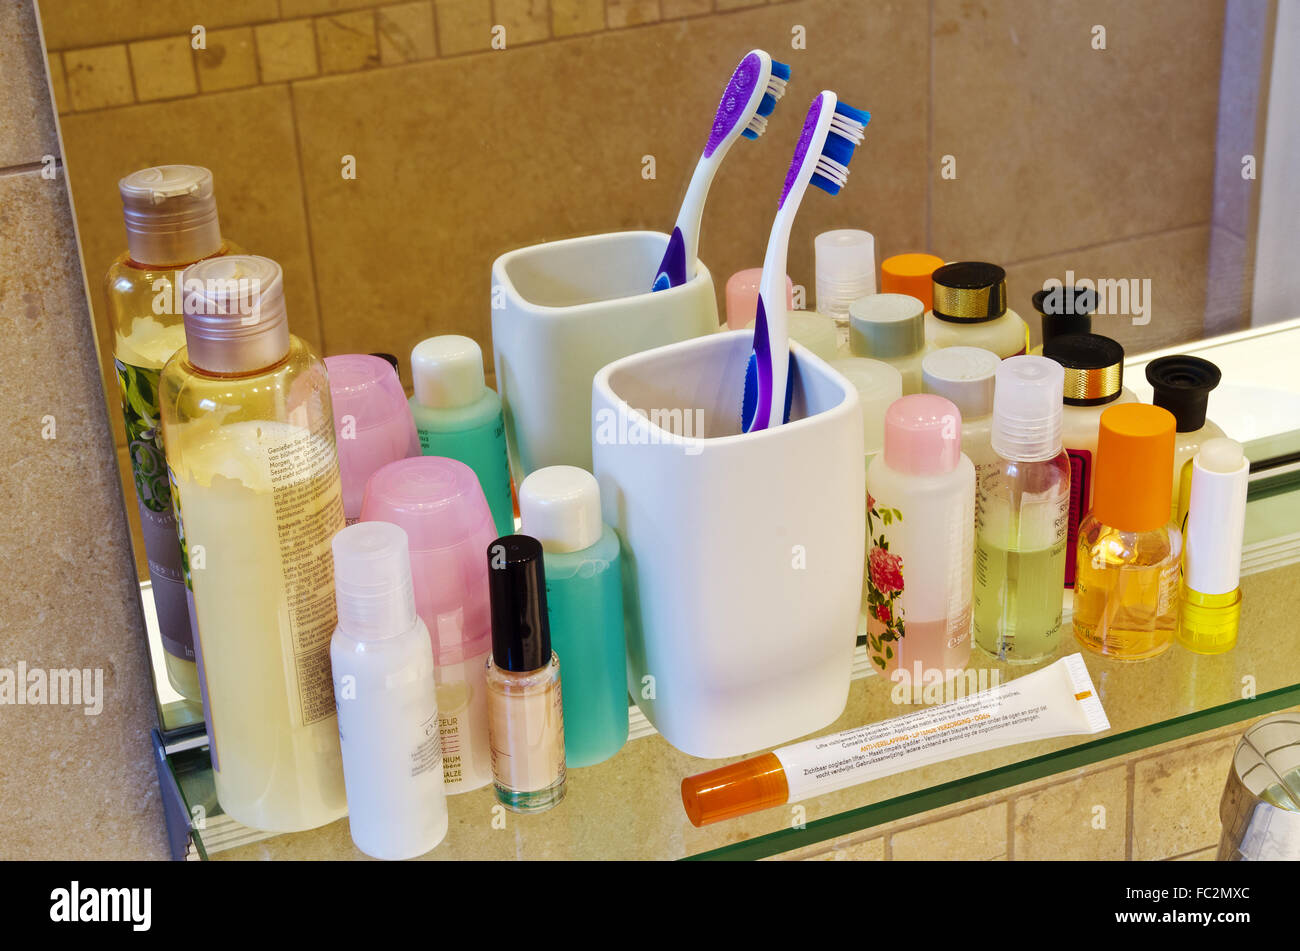 personal care products on a shelf Stock Photo